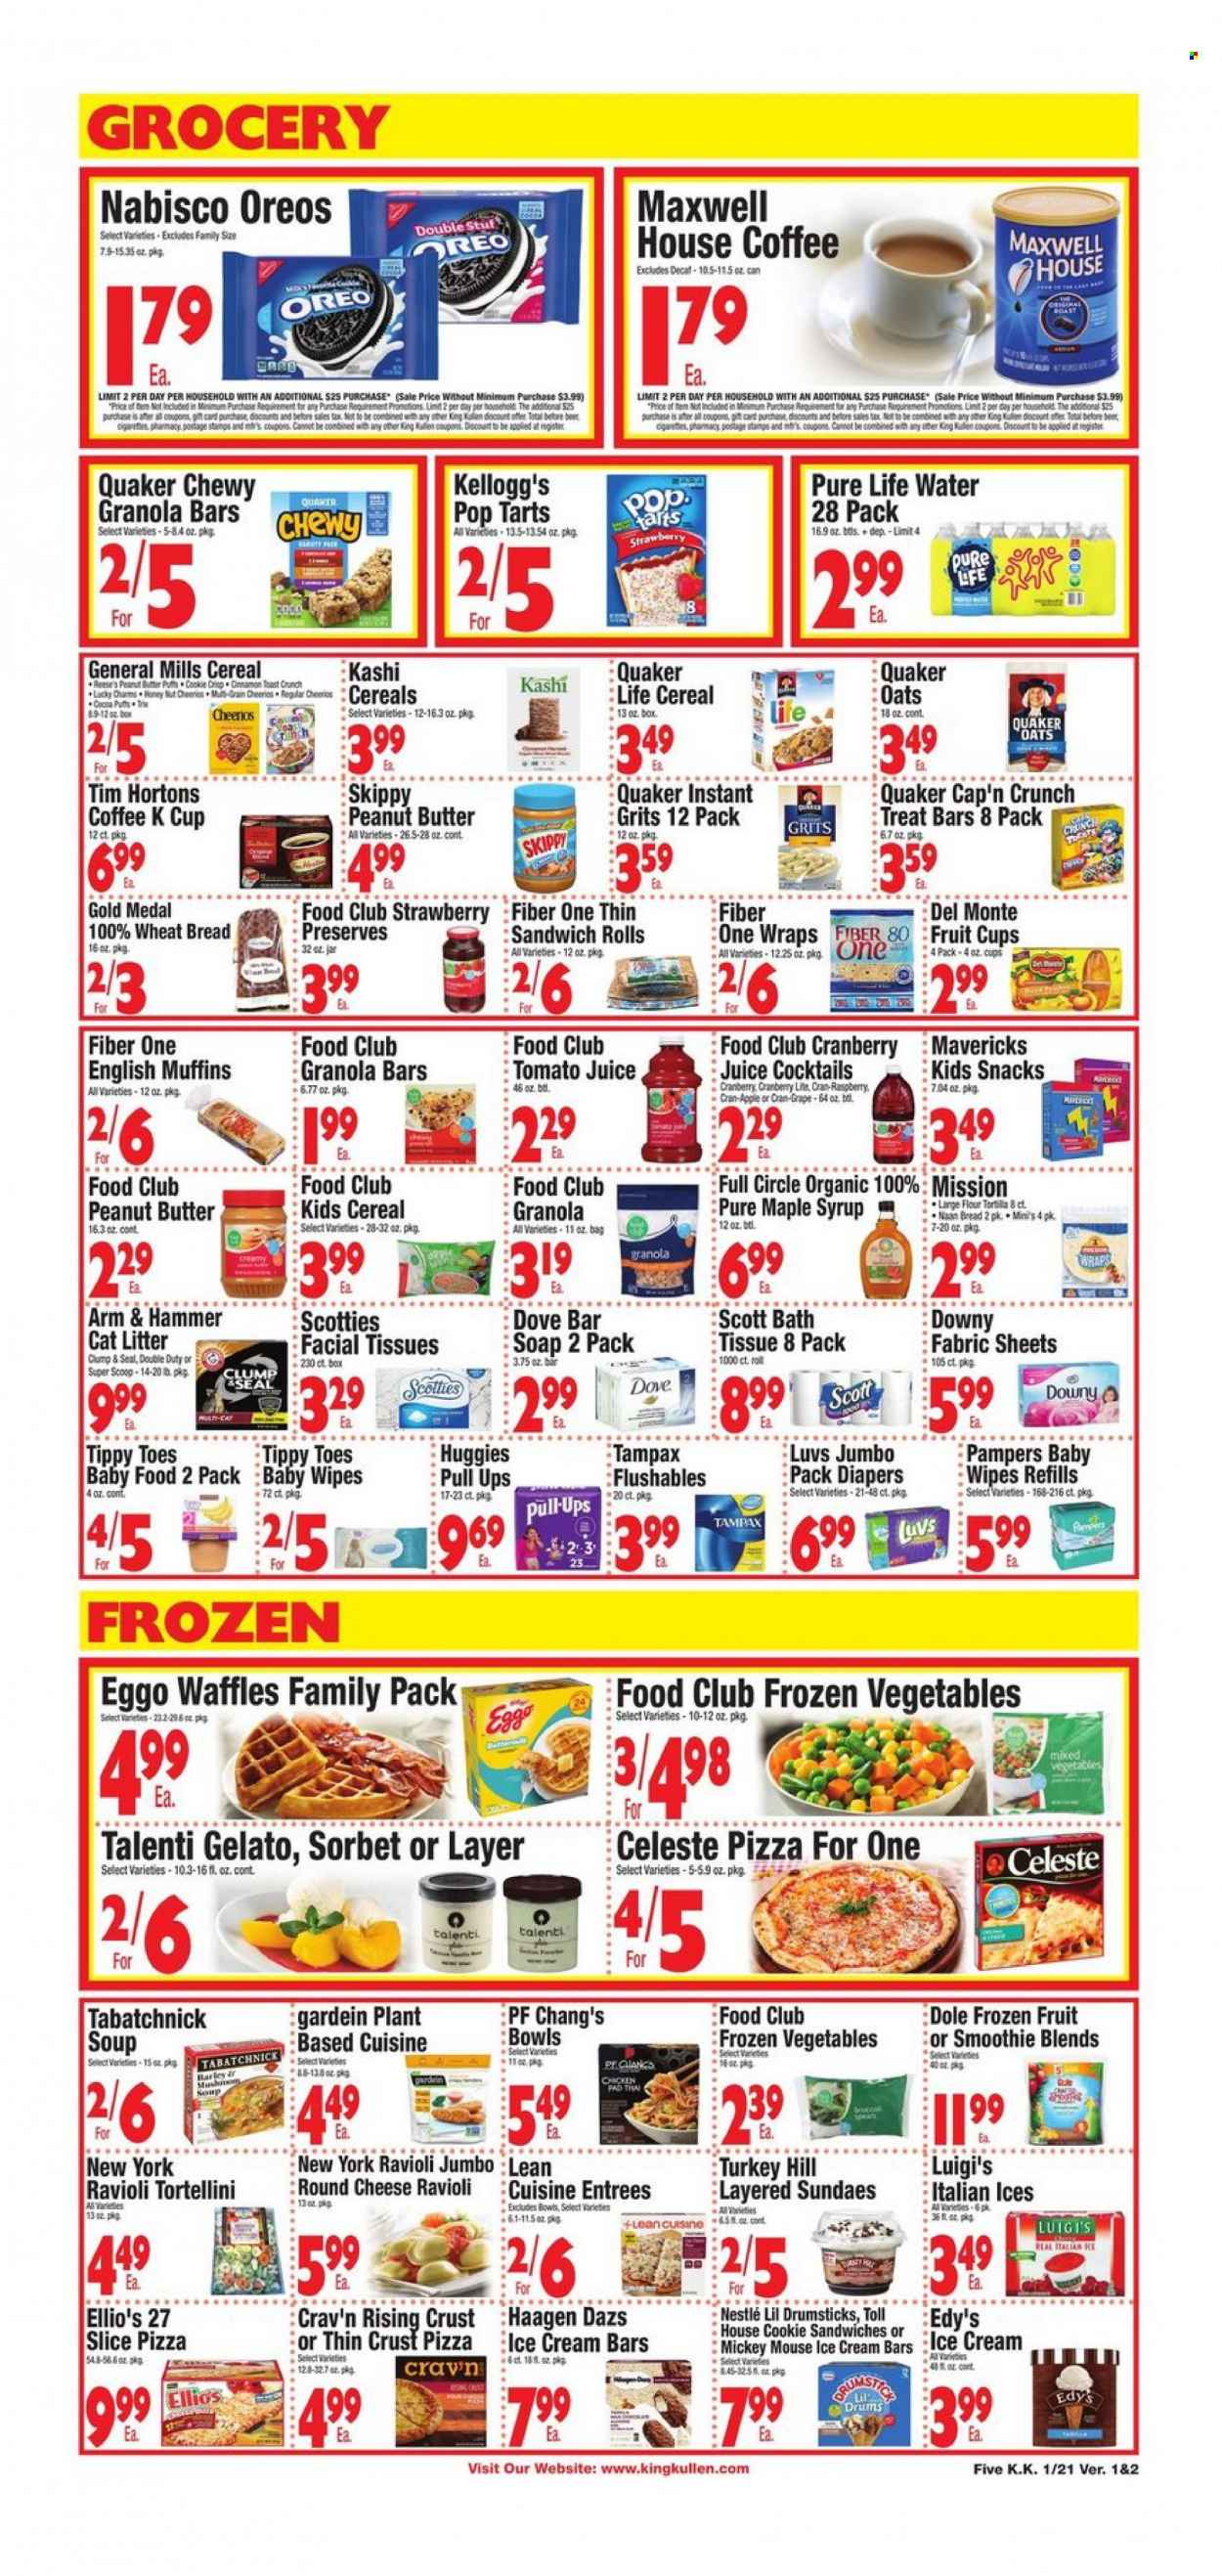 thumbnail - King Kullen Flyer - 01/21/2022 - 01/27/2022 - Sales products - fruit cup, english muffins, wheat bread, wraps, sandwich rolls, waffles, Dole, ravioli, pizza, soup, tortellini, Quaker, Oreo, ice cream, ice cream bars, Mickey Mouse, Reese's, Häagen-Dazs, Talenti Gelato, gelato, frozen vegetables, mixed vegetables, Celeste, Nestlé, snack, Kellogg's, Pop-Tarts, ARM & HAMMER, flour, oats, grits, cereals, granola bar, Cap'n Crunch, Fiber One, cinnamon, maple syrup, peanut butter, syrup, tomato juice, juice, Cran-Grape, smoothie, Pure Life Water, Maxwell House, coffee, coffee capsules, K-Cups, red wine, wine, wipes, Huggies, Pampers, baby wipes, nappies, Dove, bath tissue, Scott, Downy Laundry, soap bar, soap, Tampax, facial tissues, cat litter. Page 5.